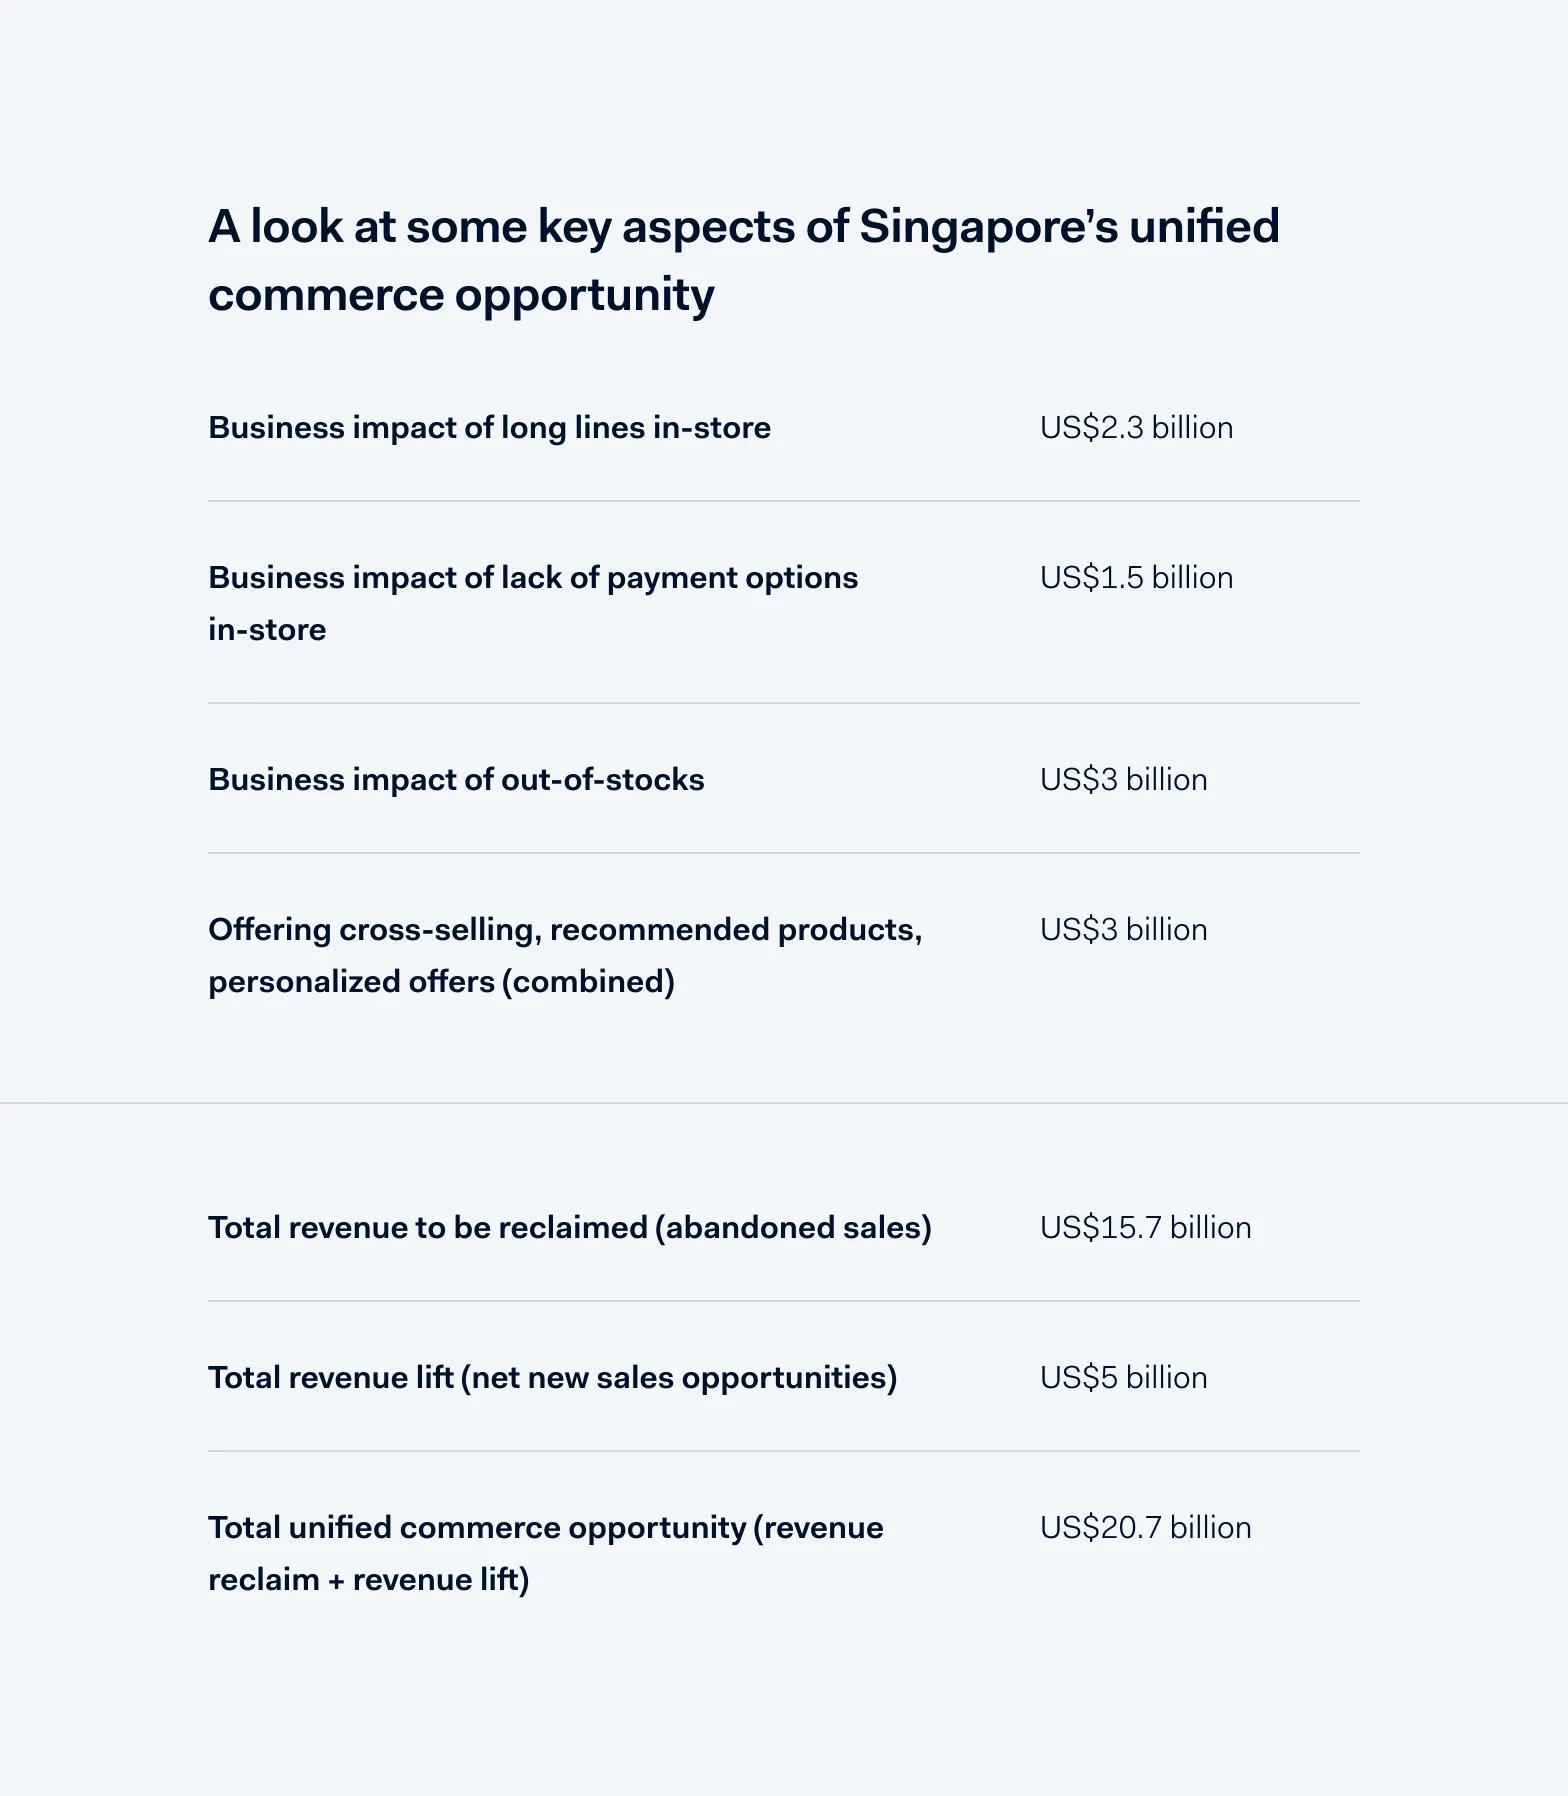 A look at some key aspects of Singapore’s unified commerce opportunity